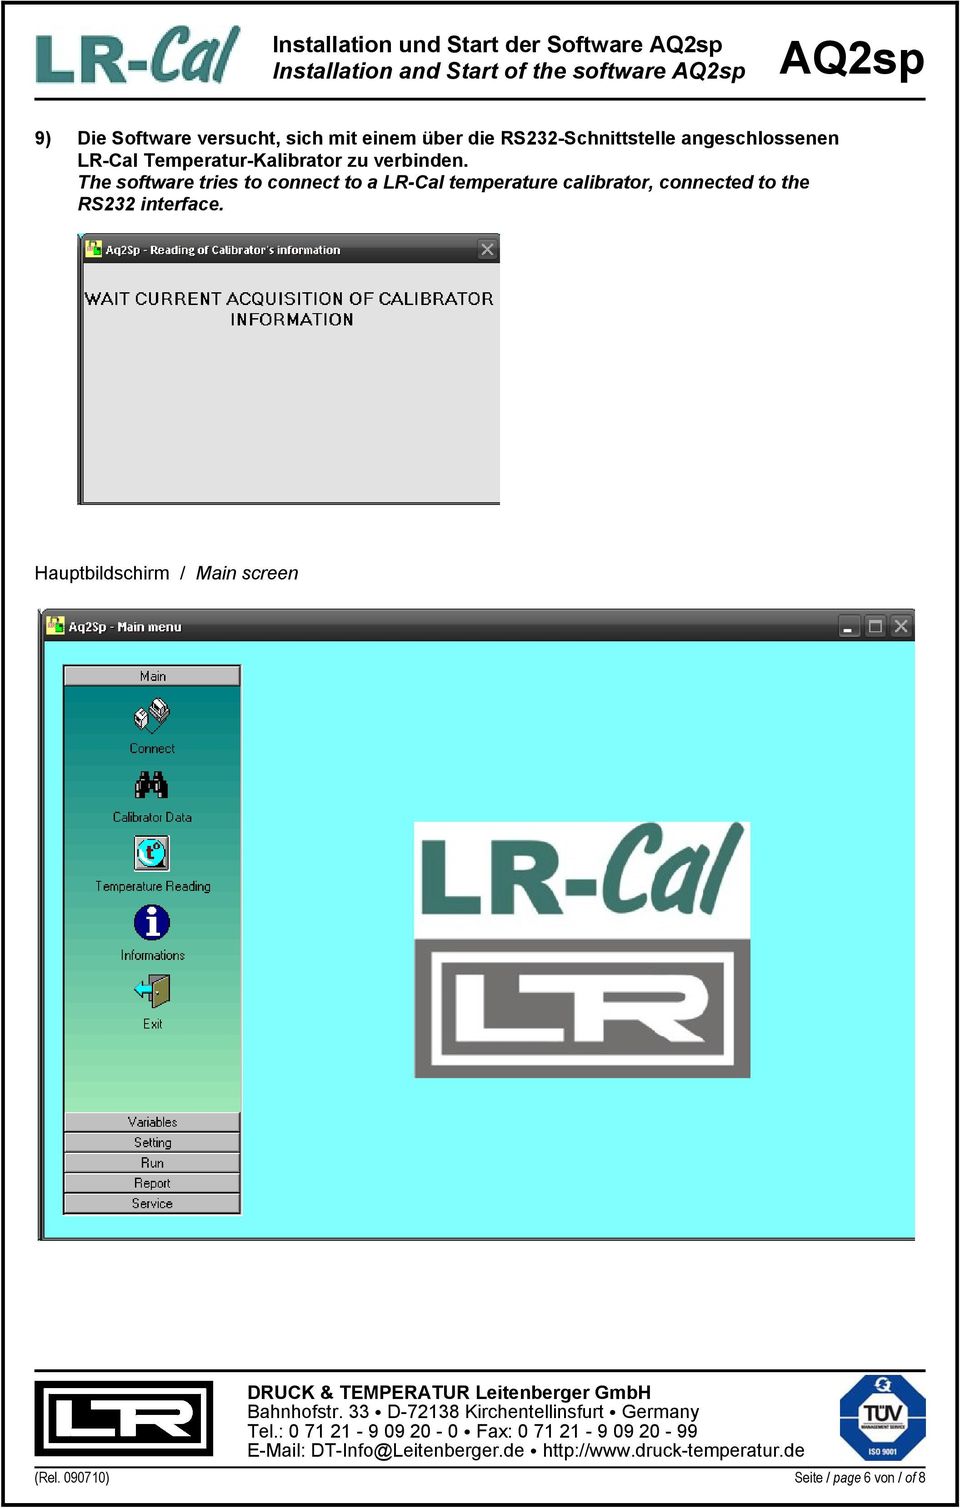 The software tries to connect to a LR-Cal temperature calibrator, connected to the